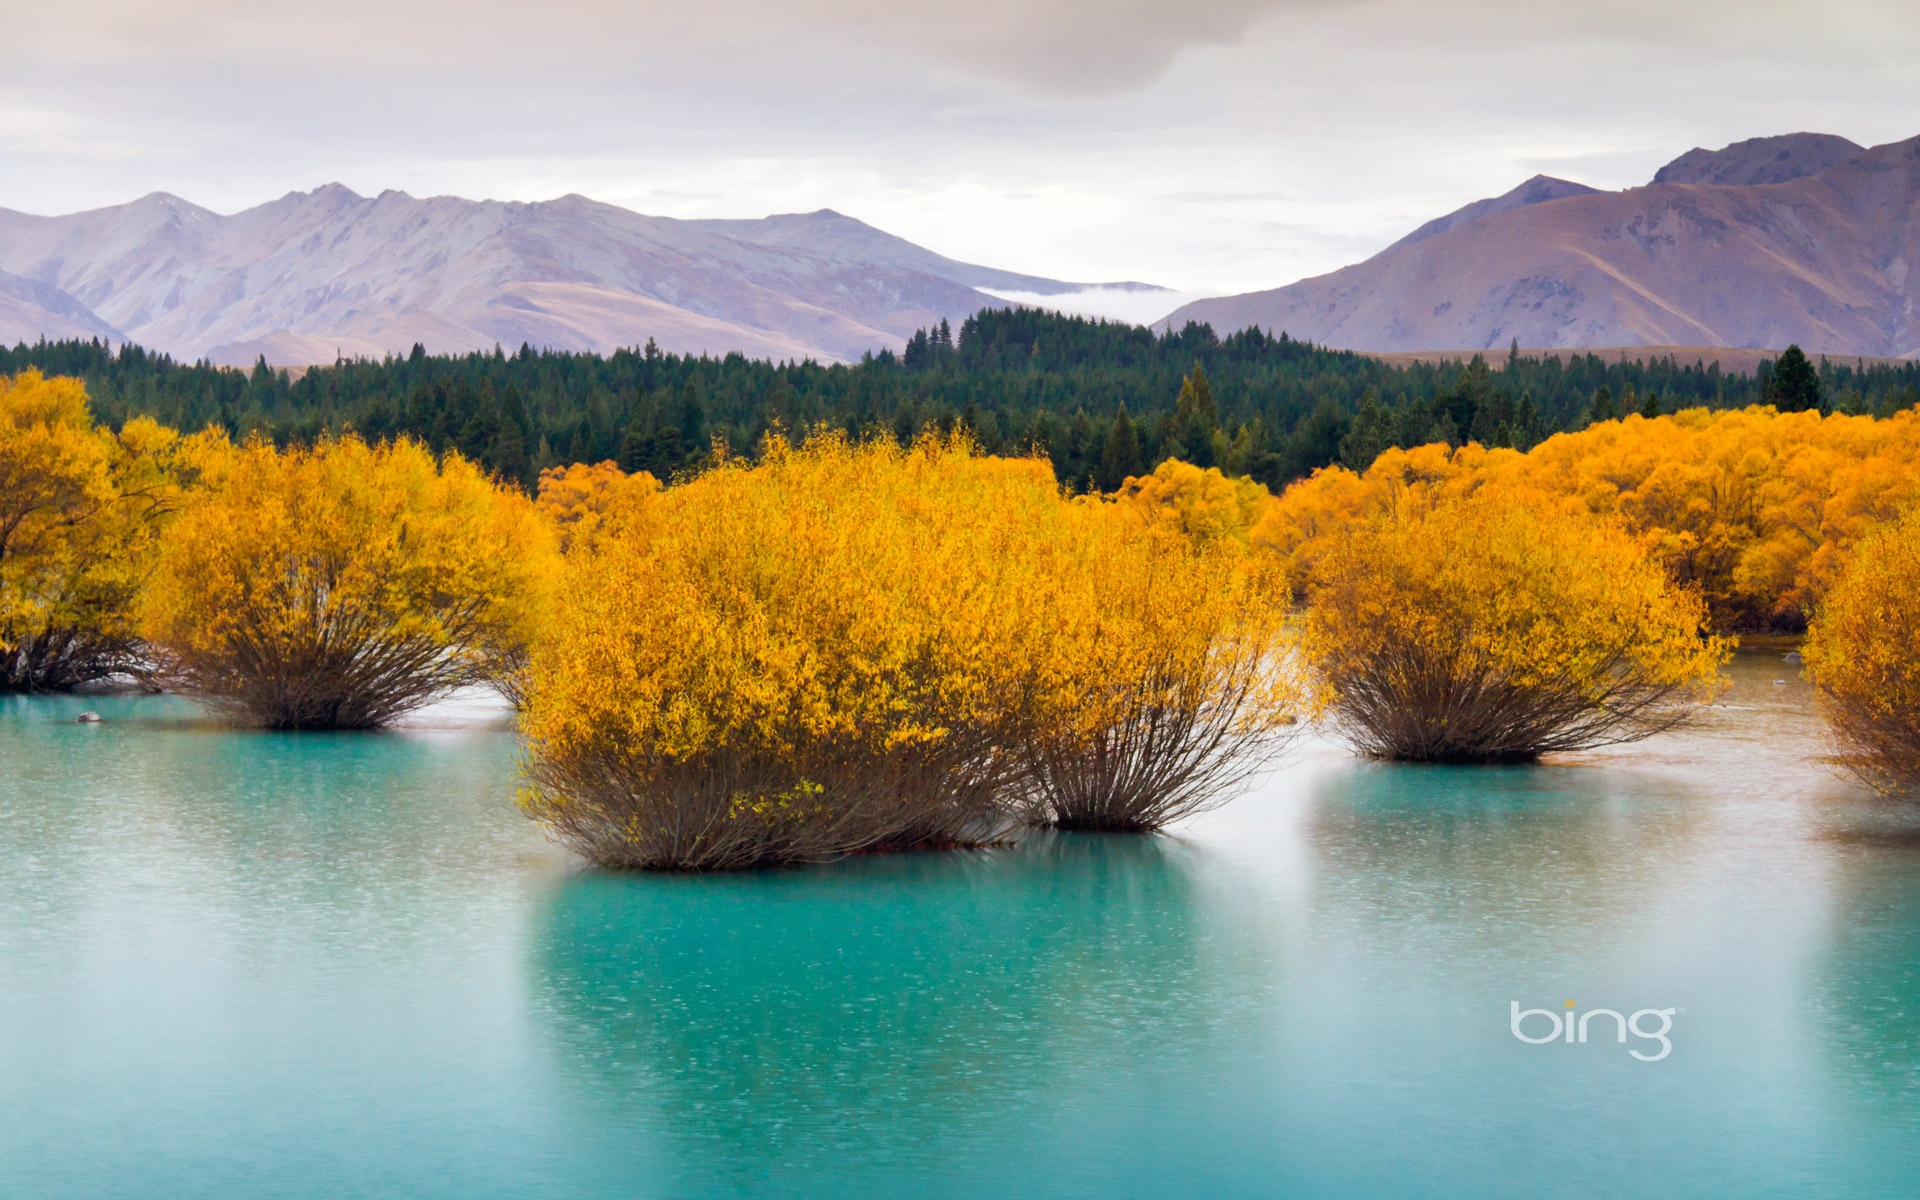 2013 Bing official theme HD wallpapers #5 - 1920x1200